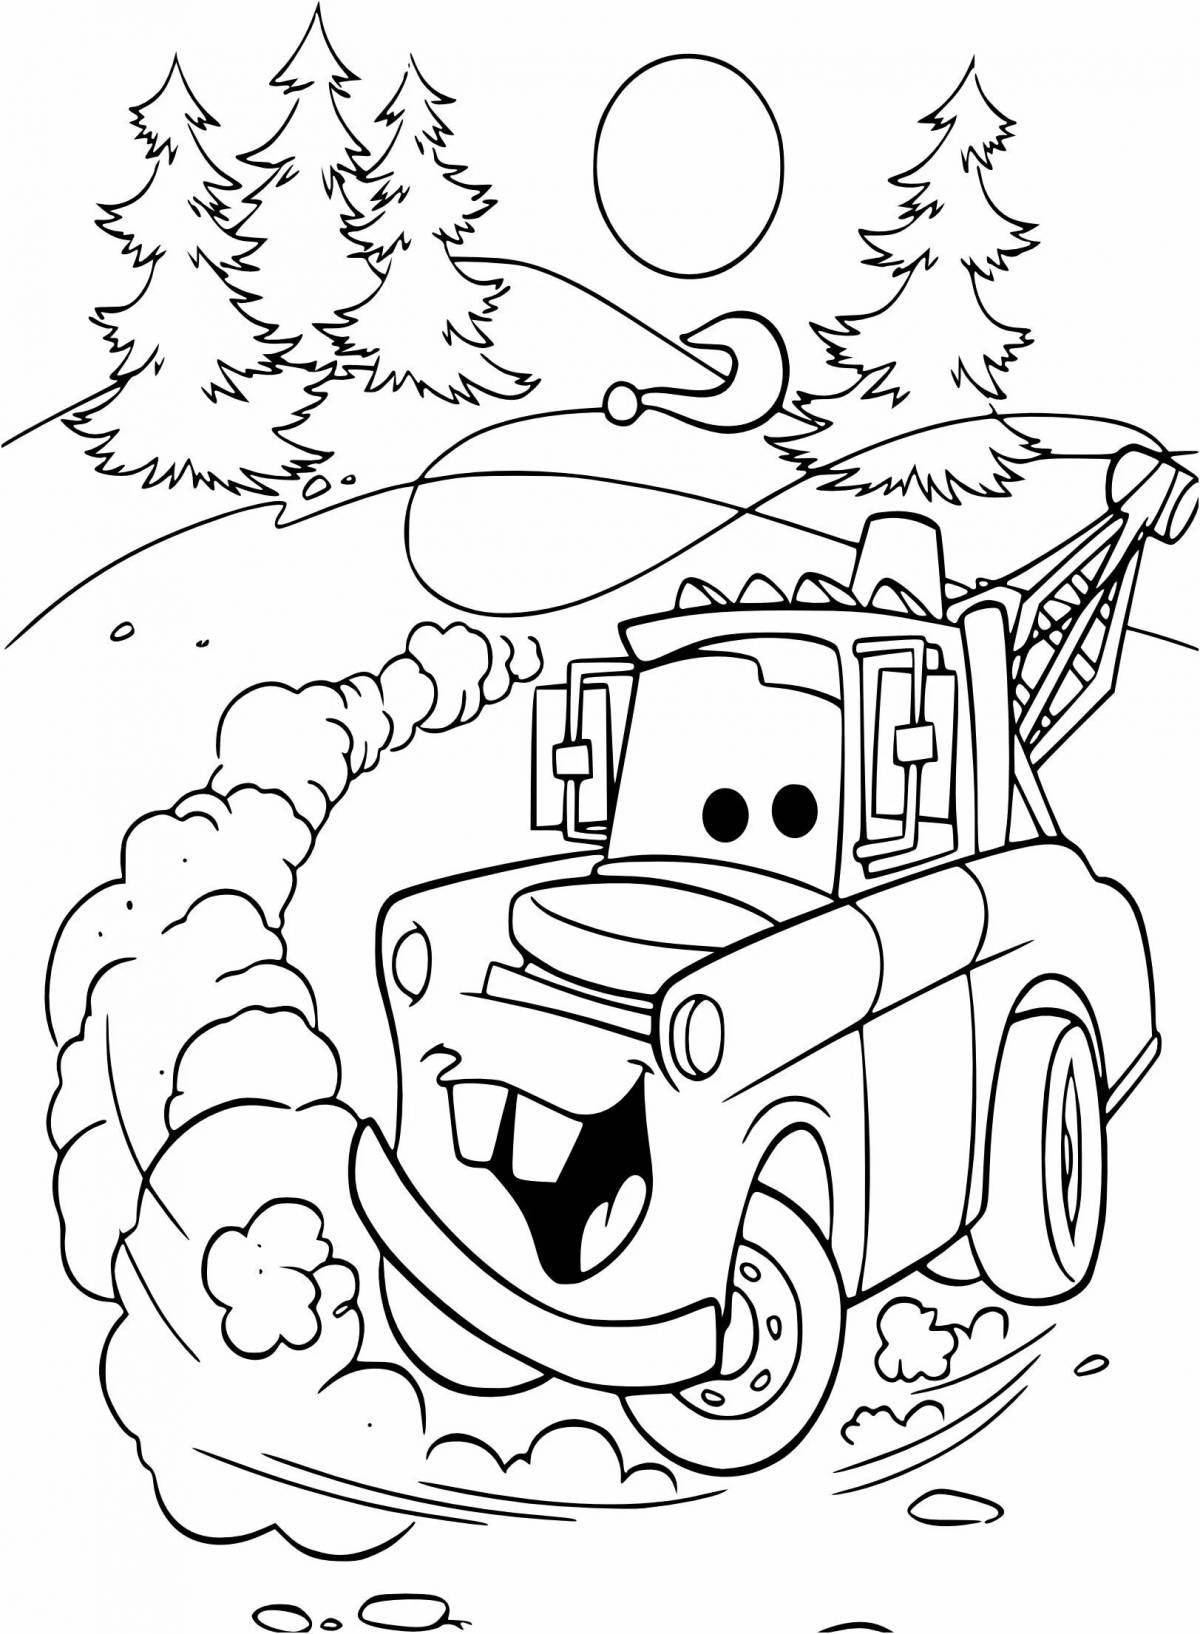 Coloring for colorful cars for children 6-7 years old